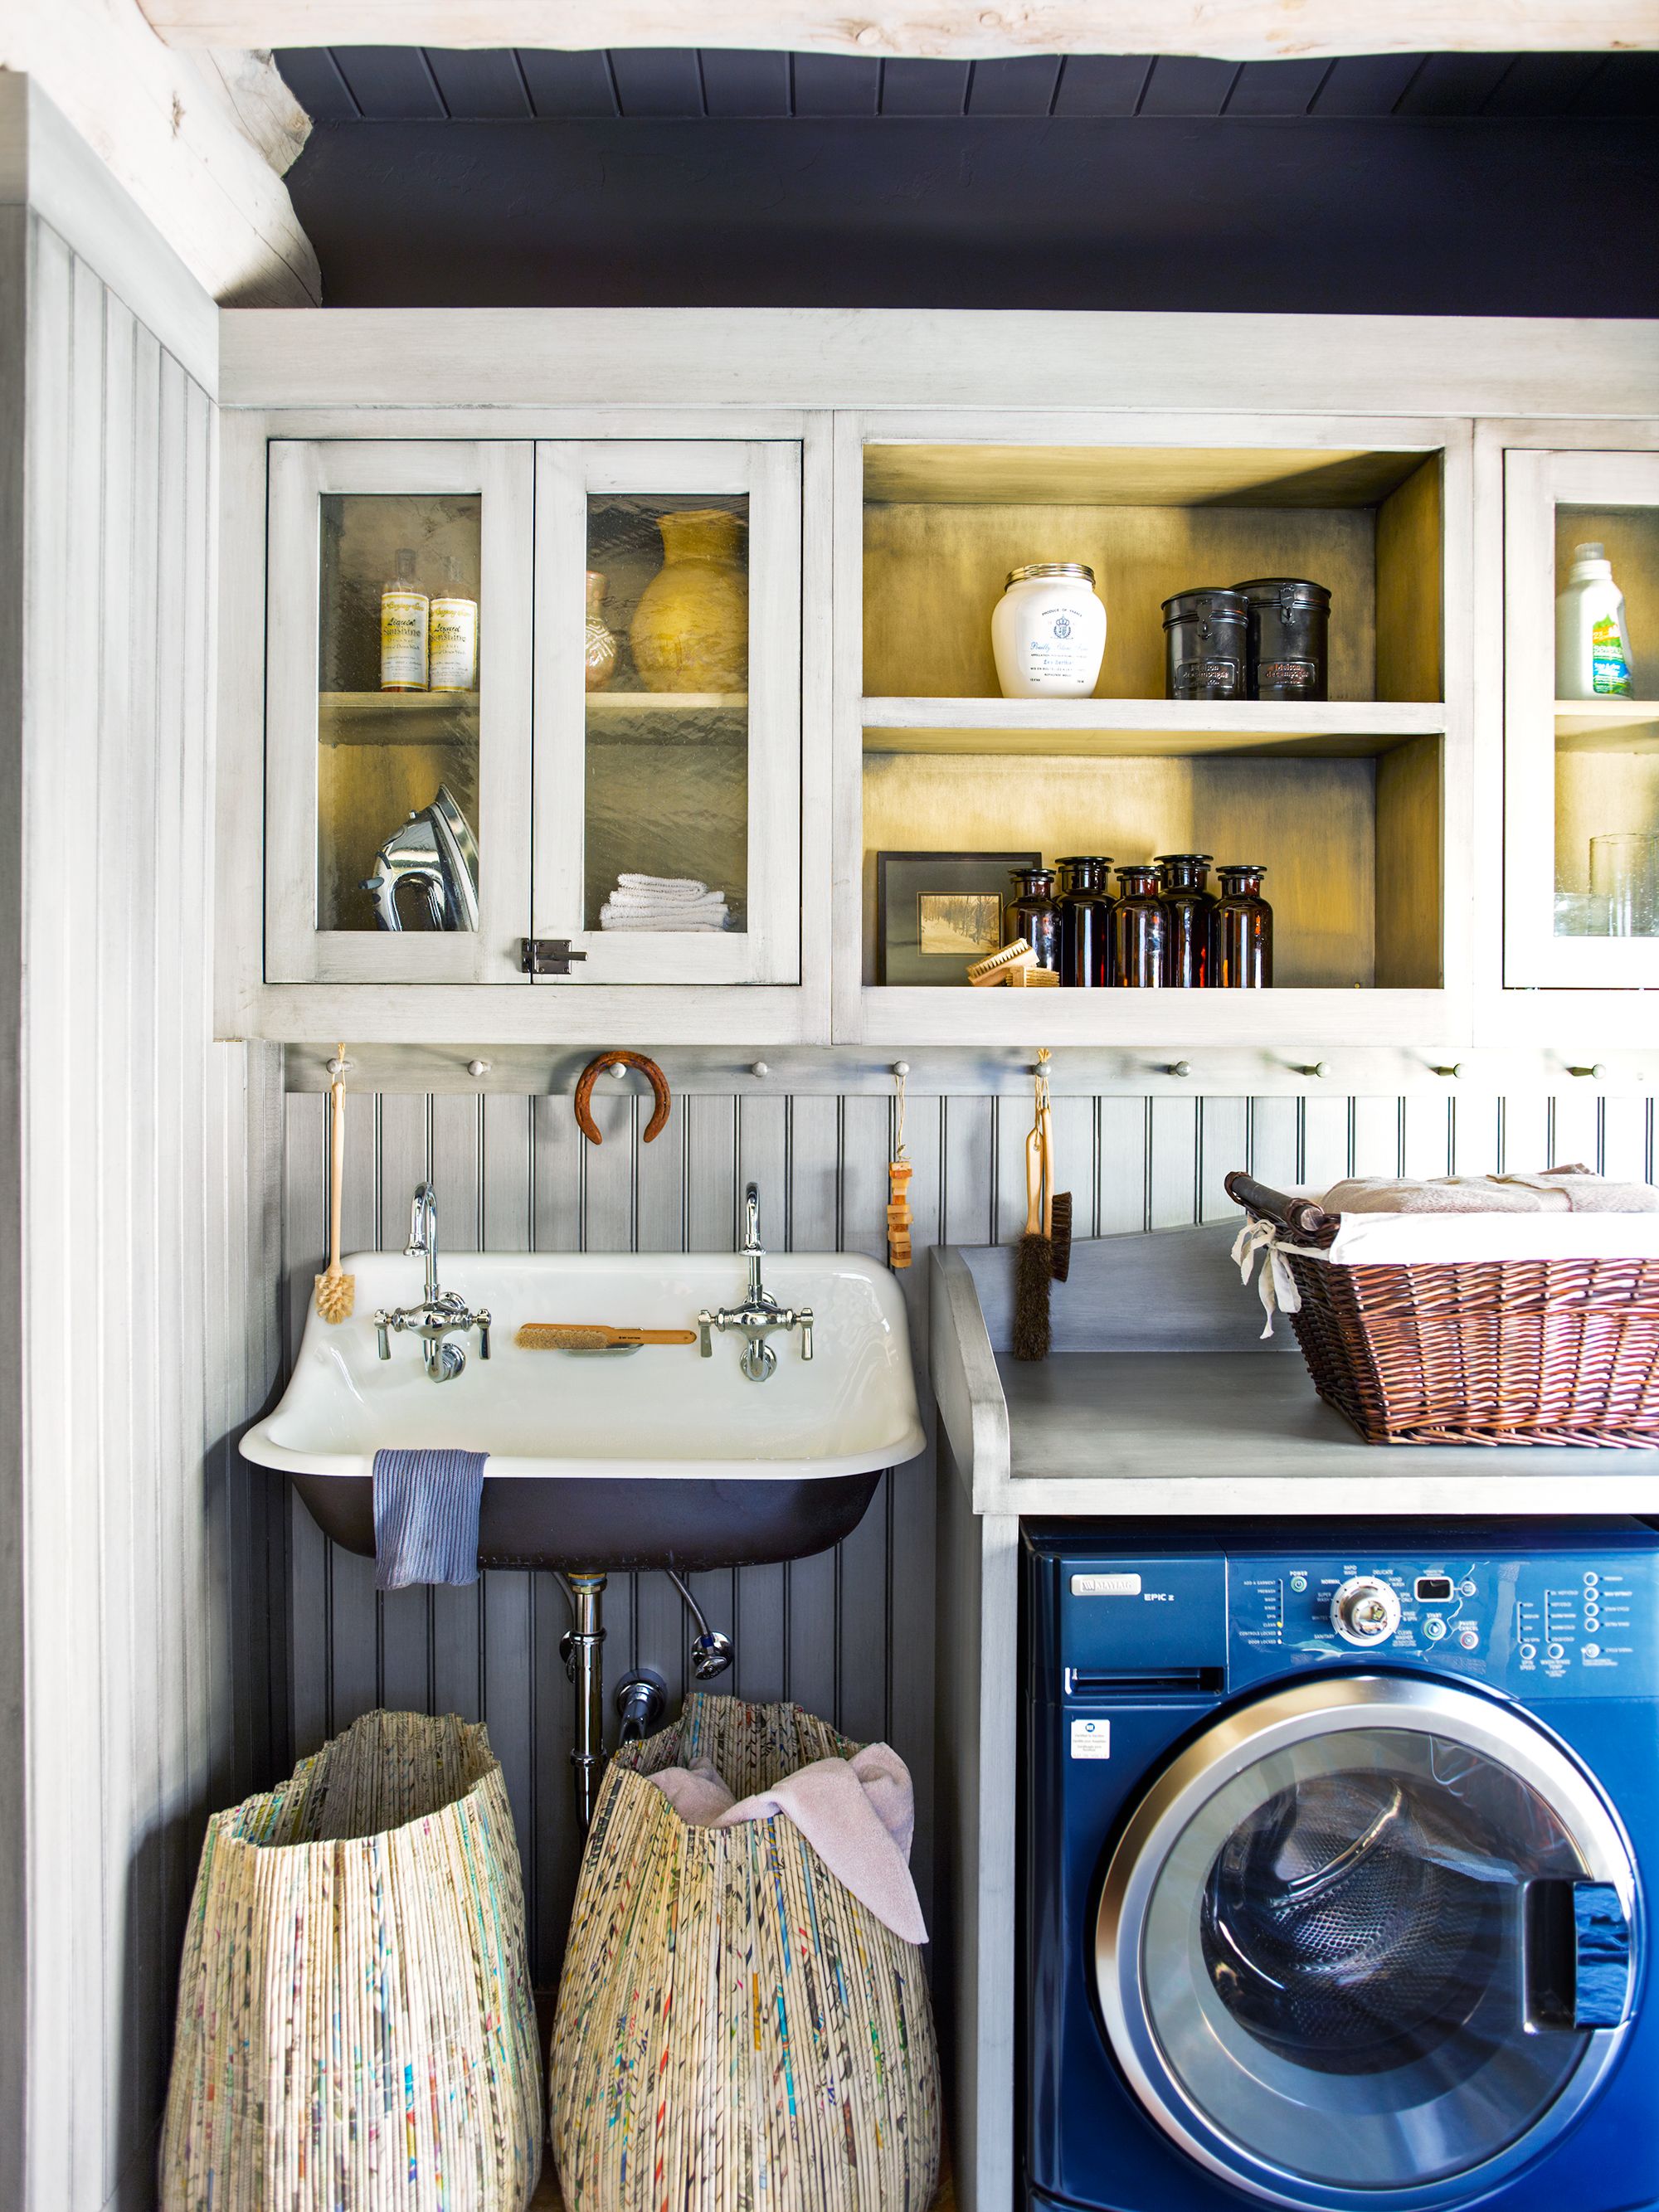 26 Small Laundry Room Ideas That Maximize Space and Style